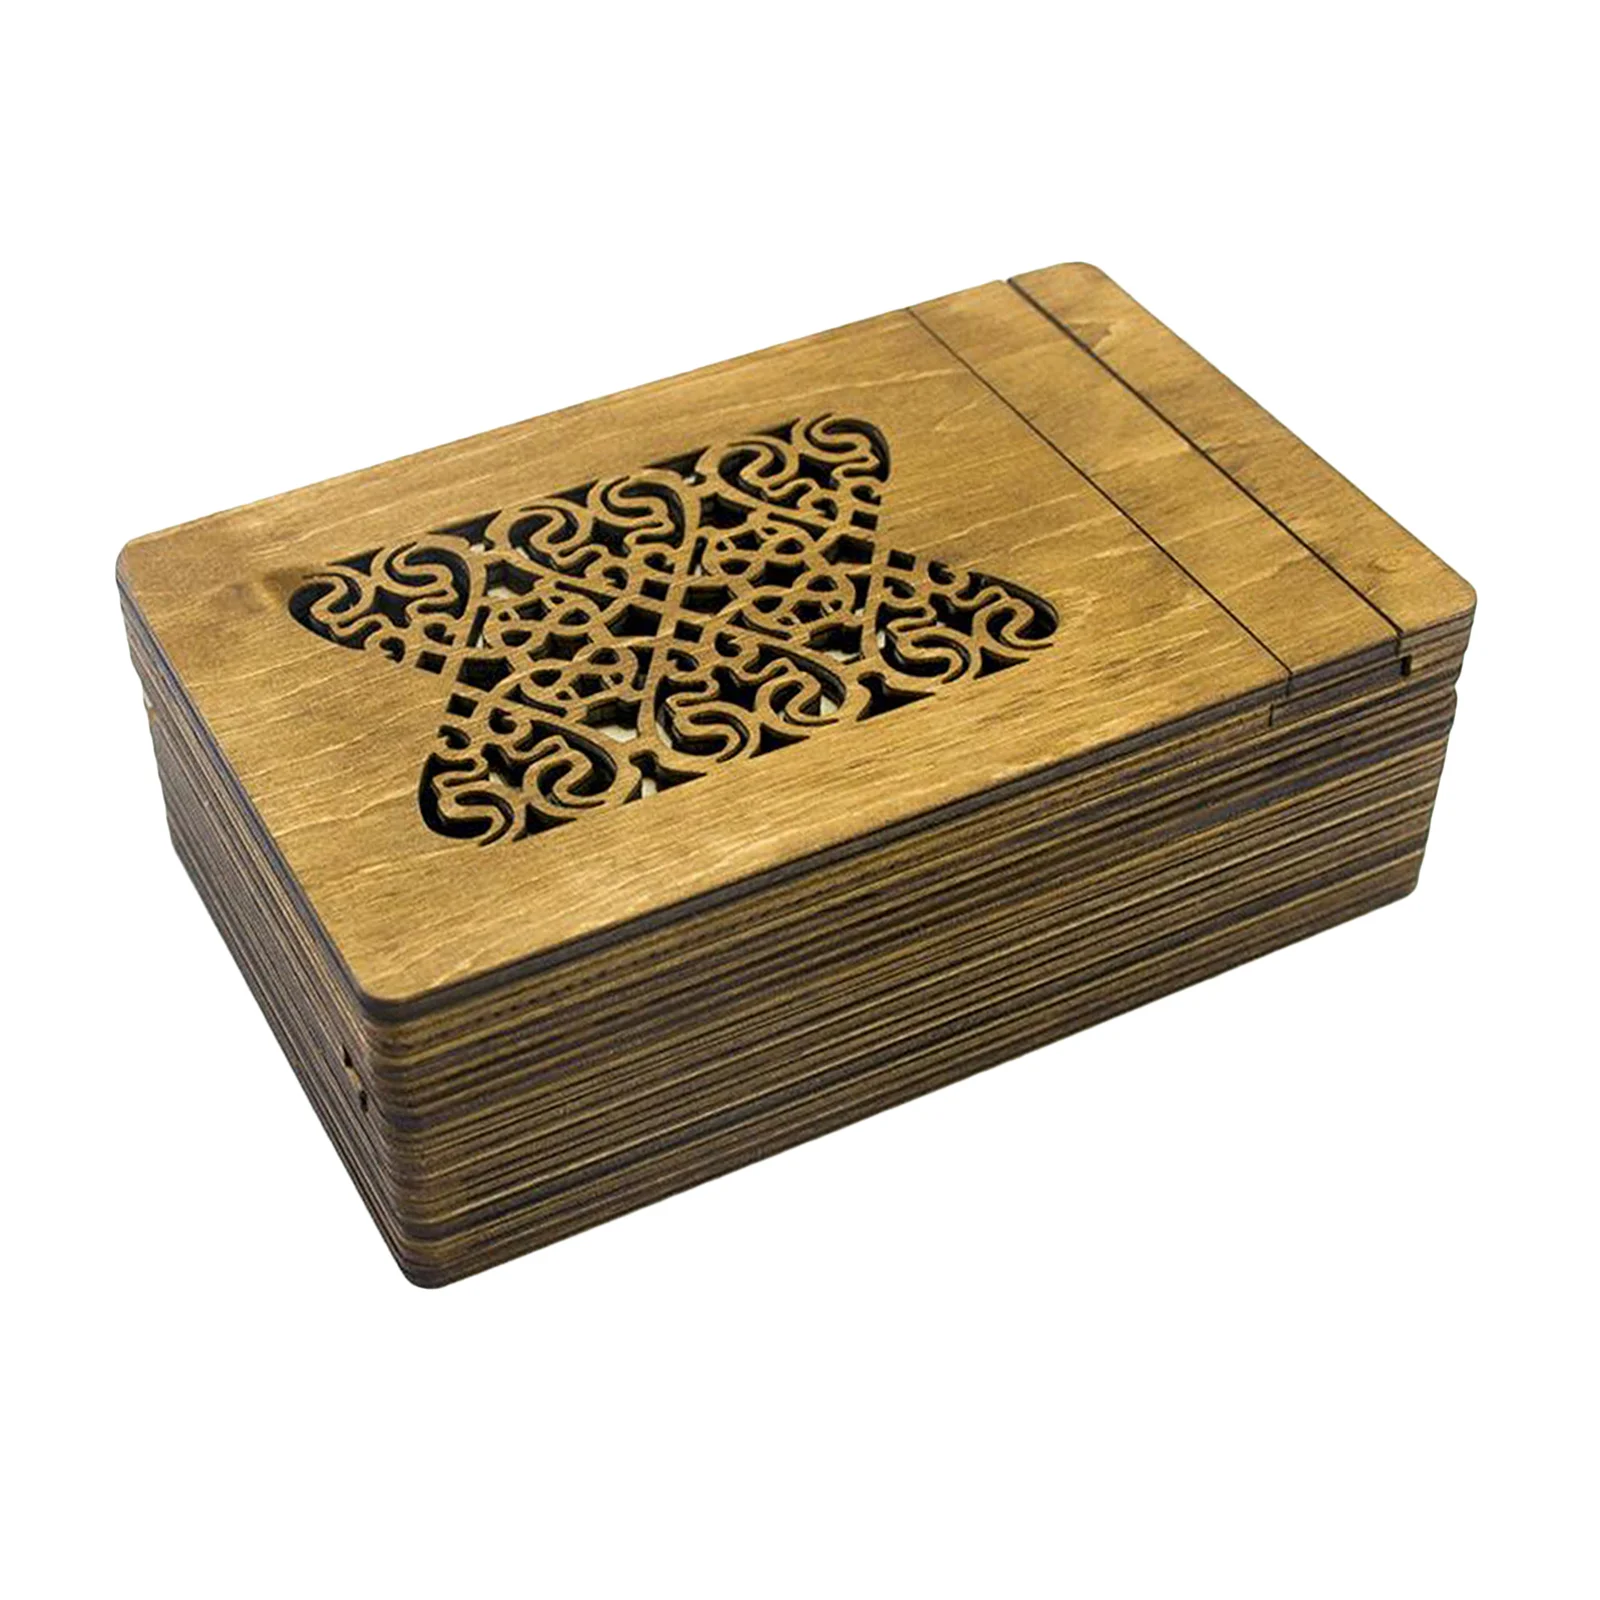 Wooden Puzzle Storage Box Games Box Toys for Kids Adult Boys Girls